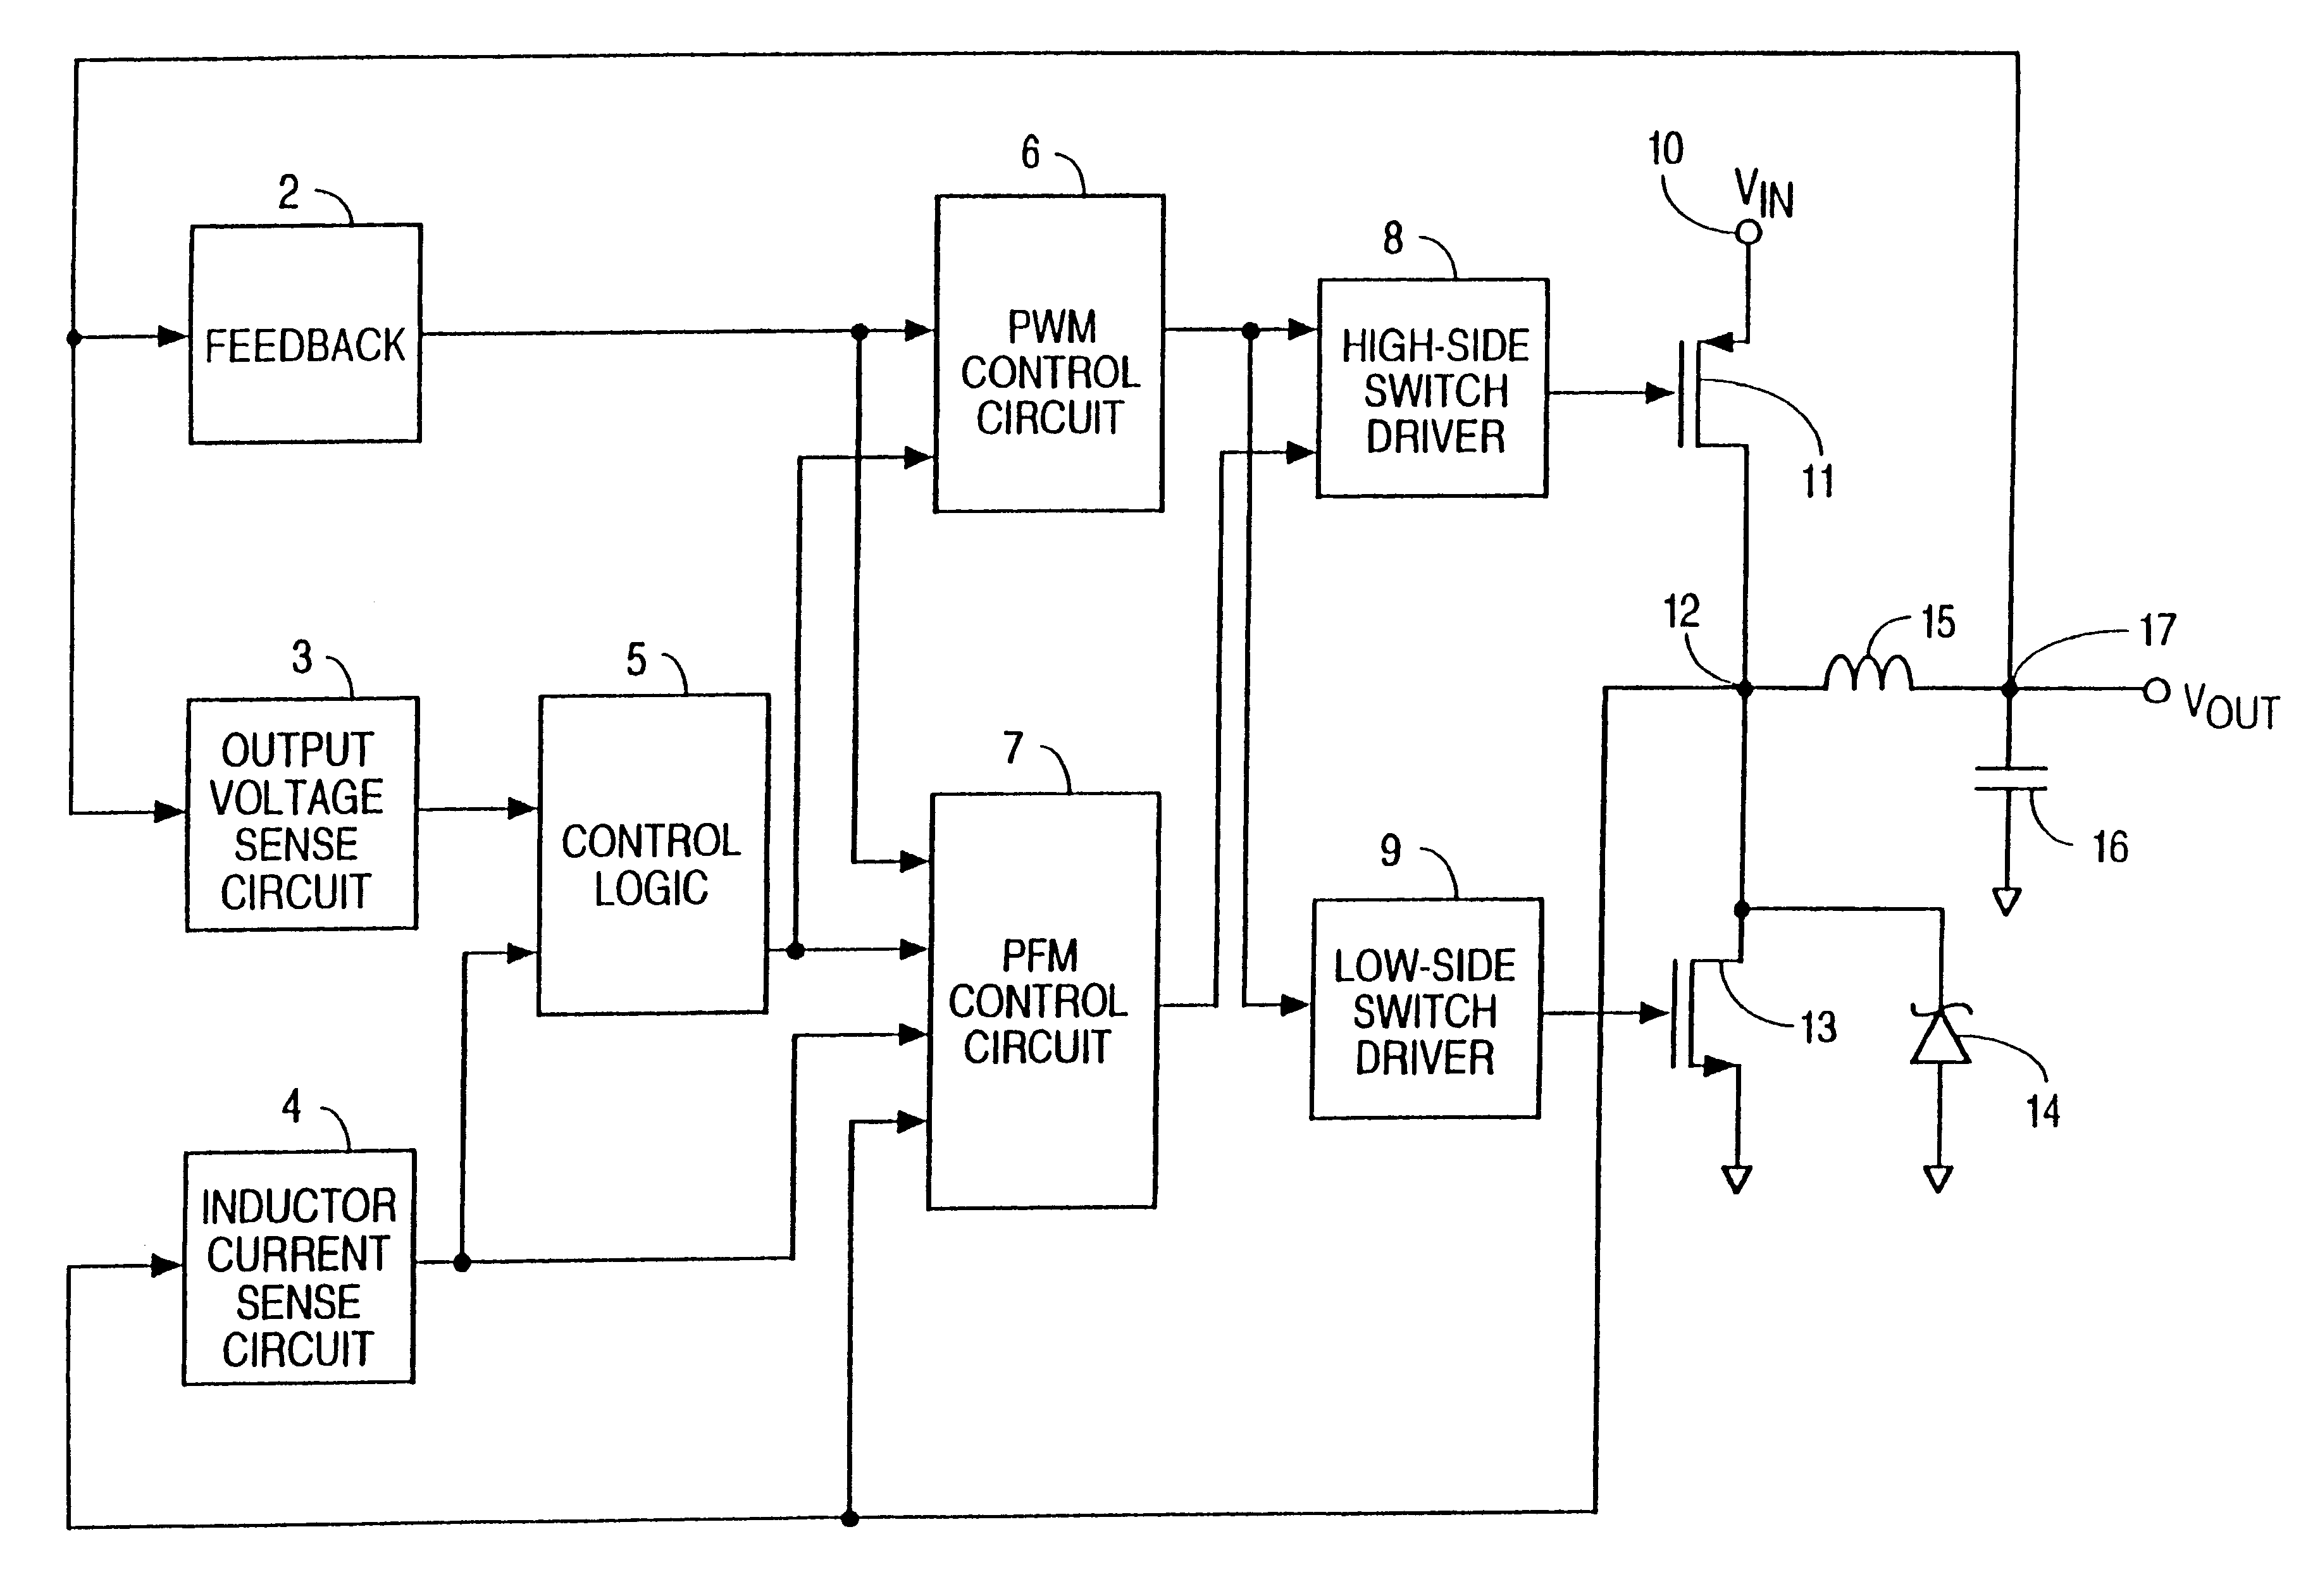 Voltage regulator that operates in either PWM or PFM mode